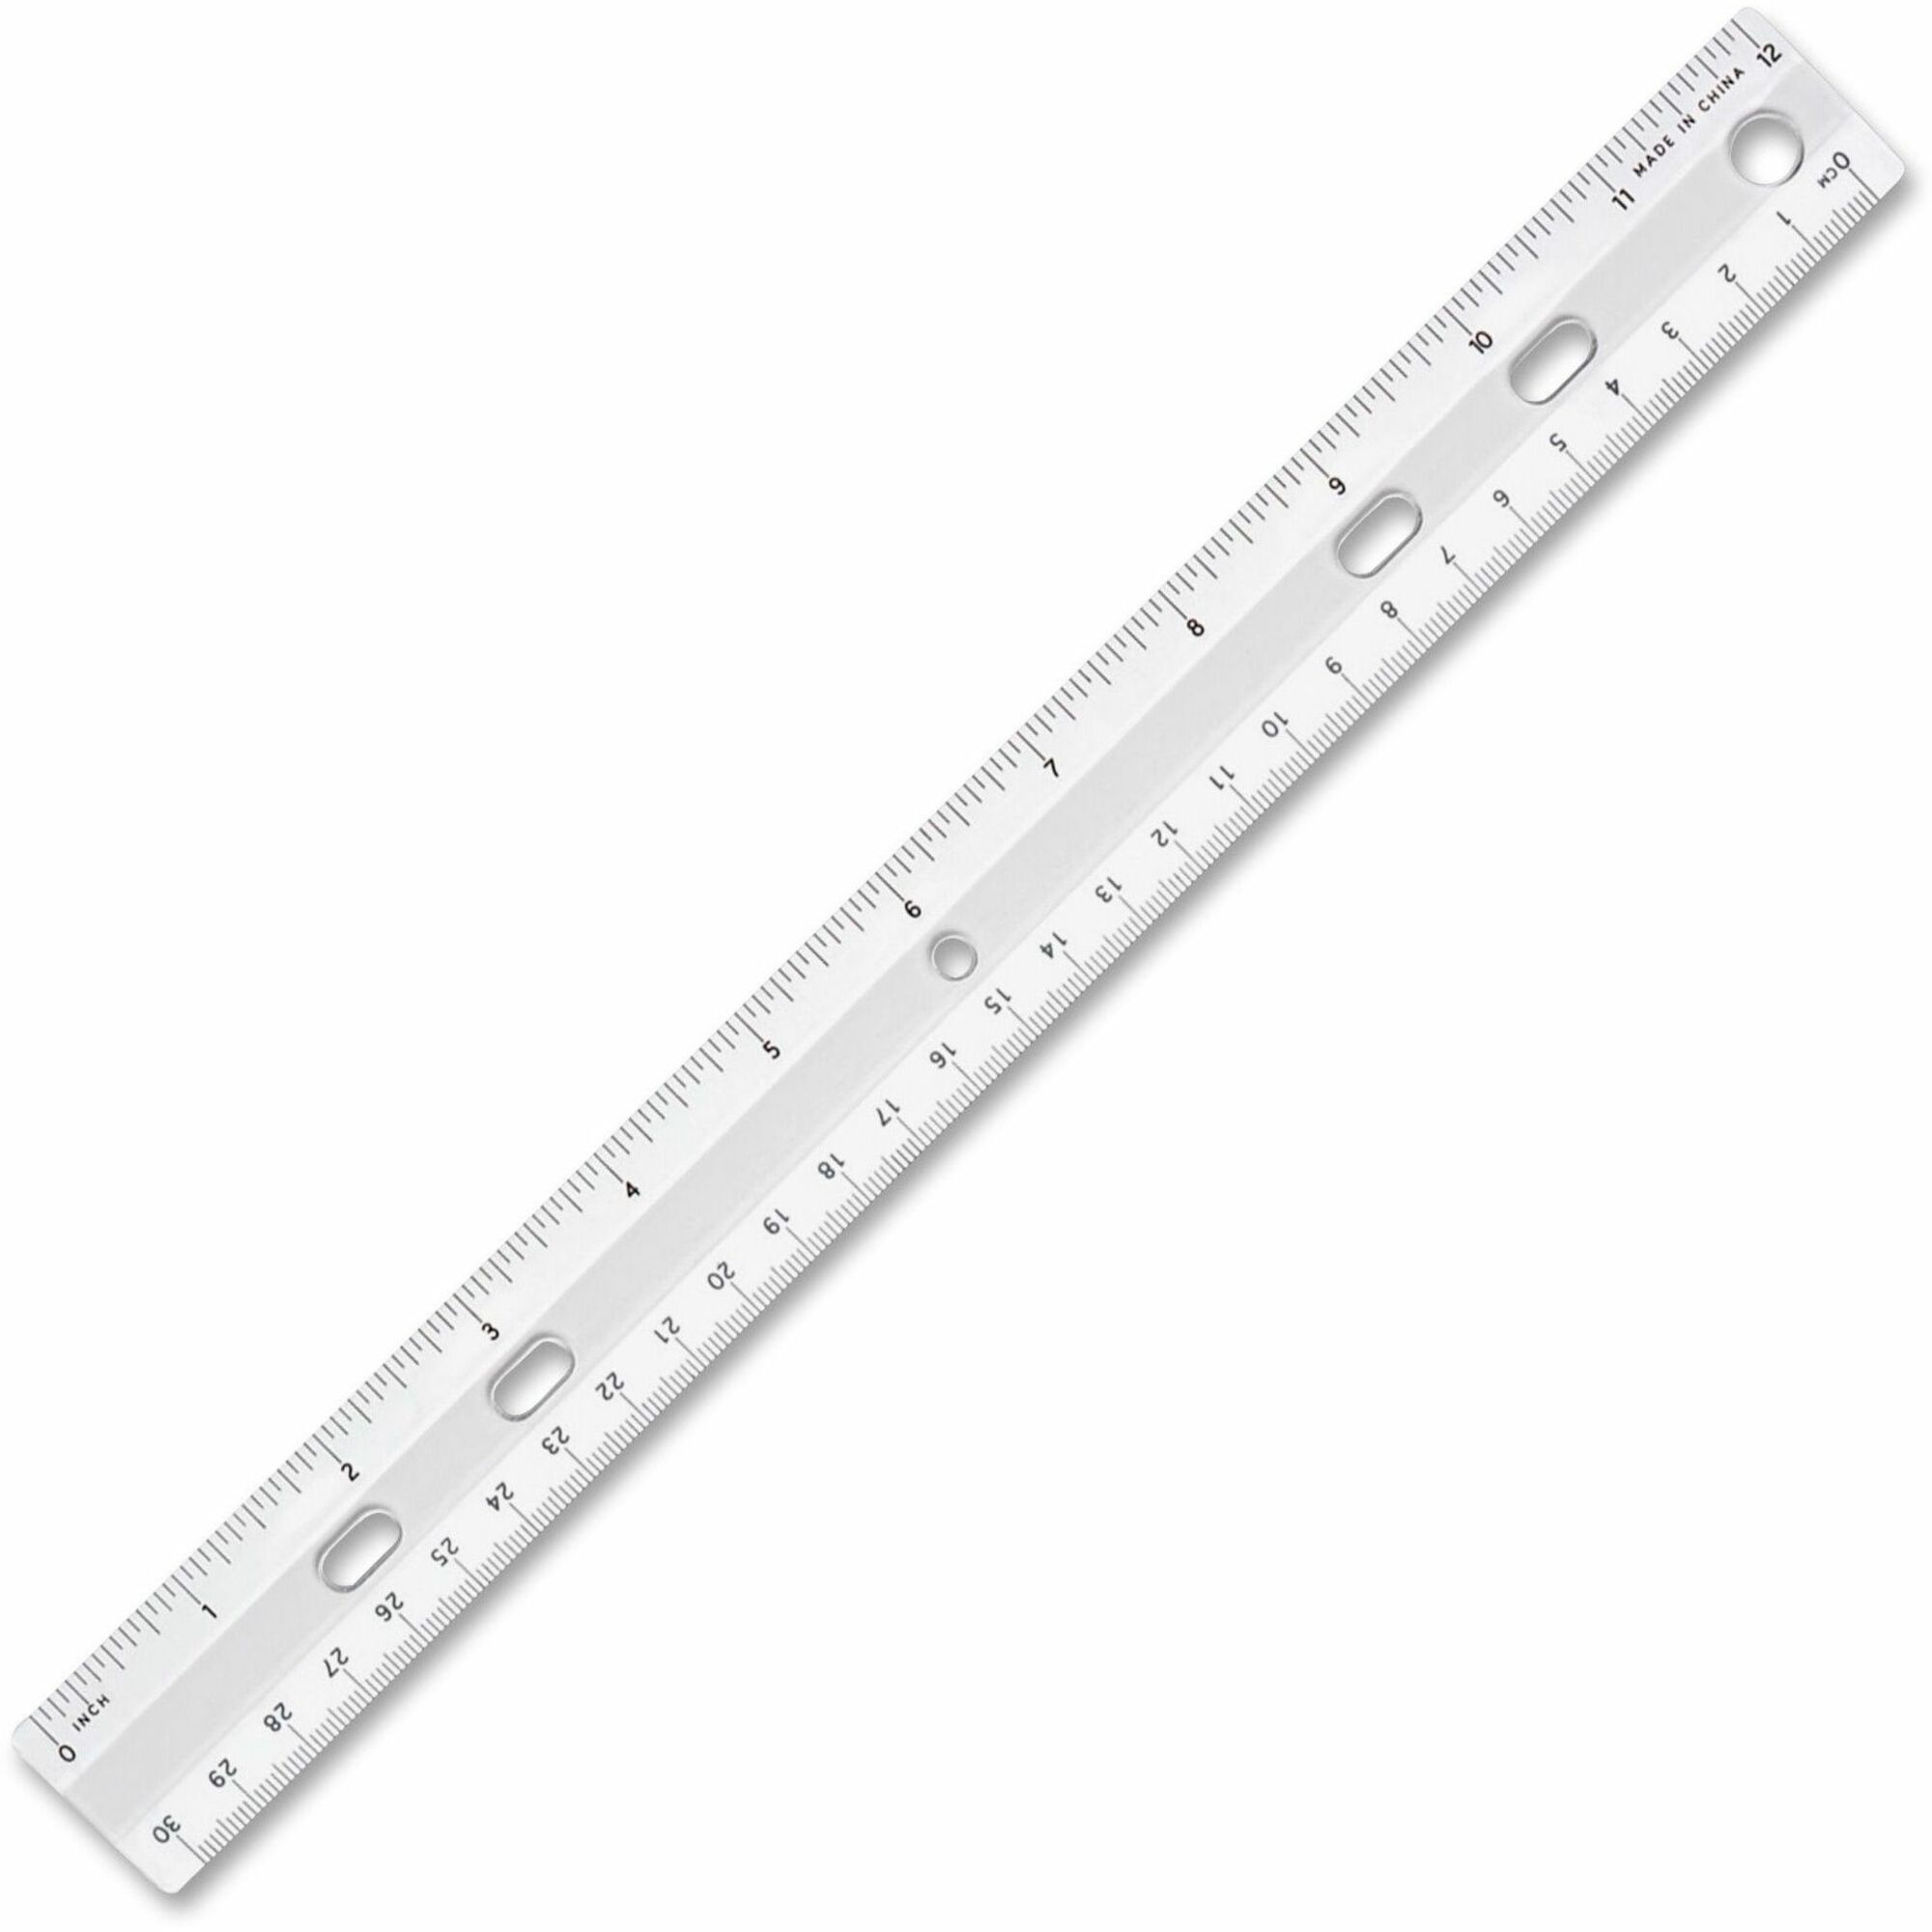 sparco-standard-metric-ruler-madill-the-office-company